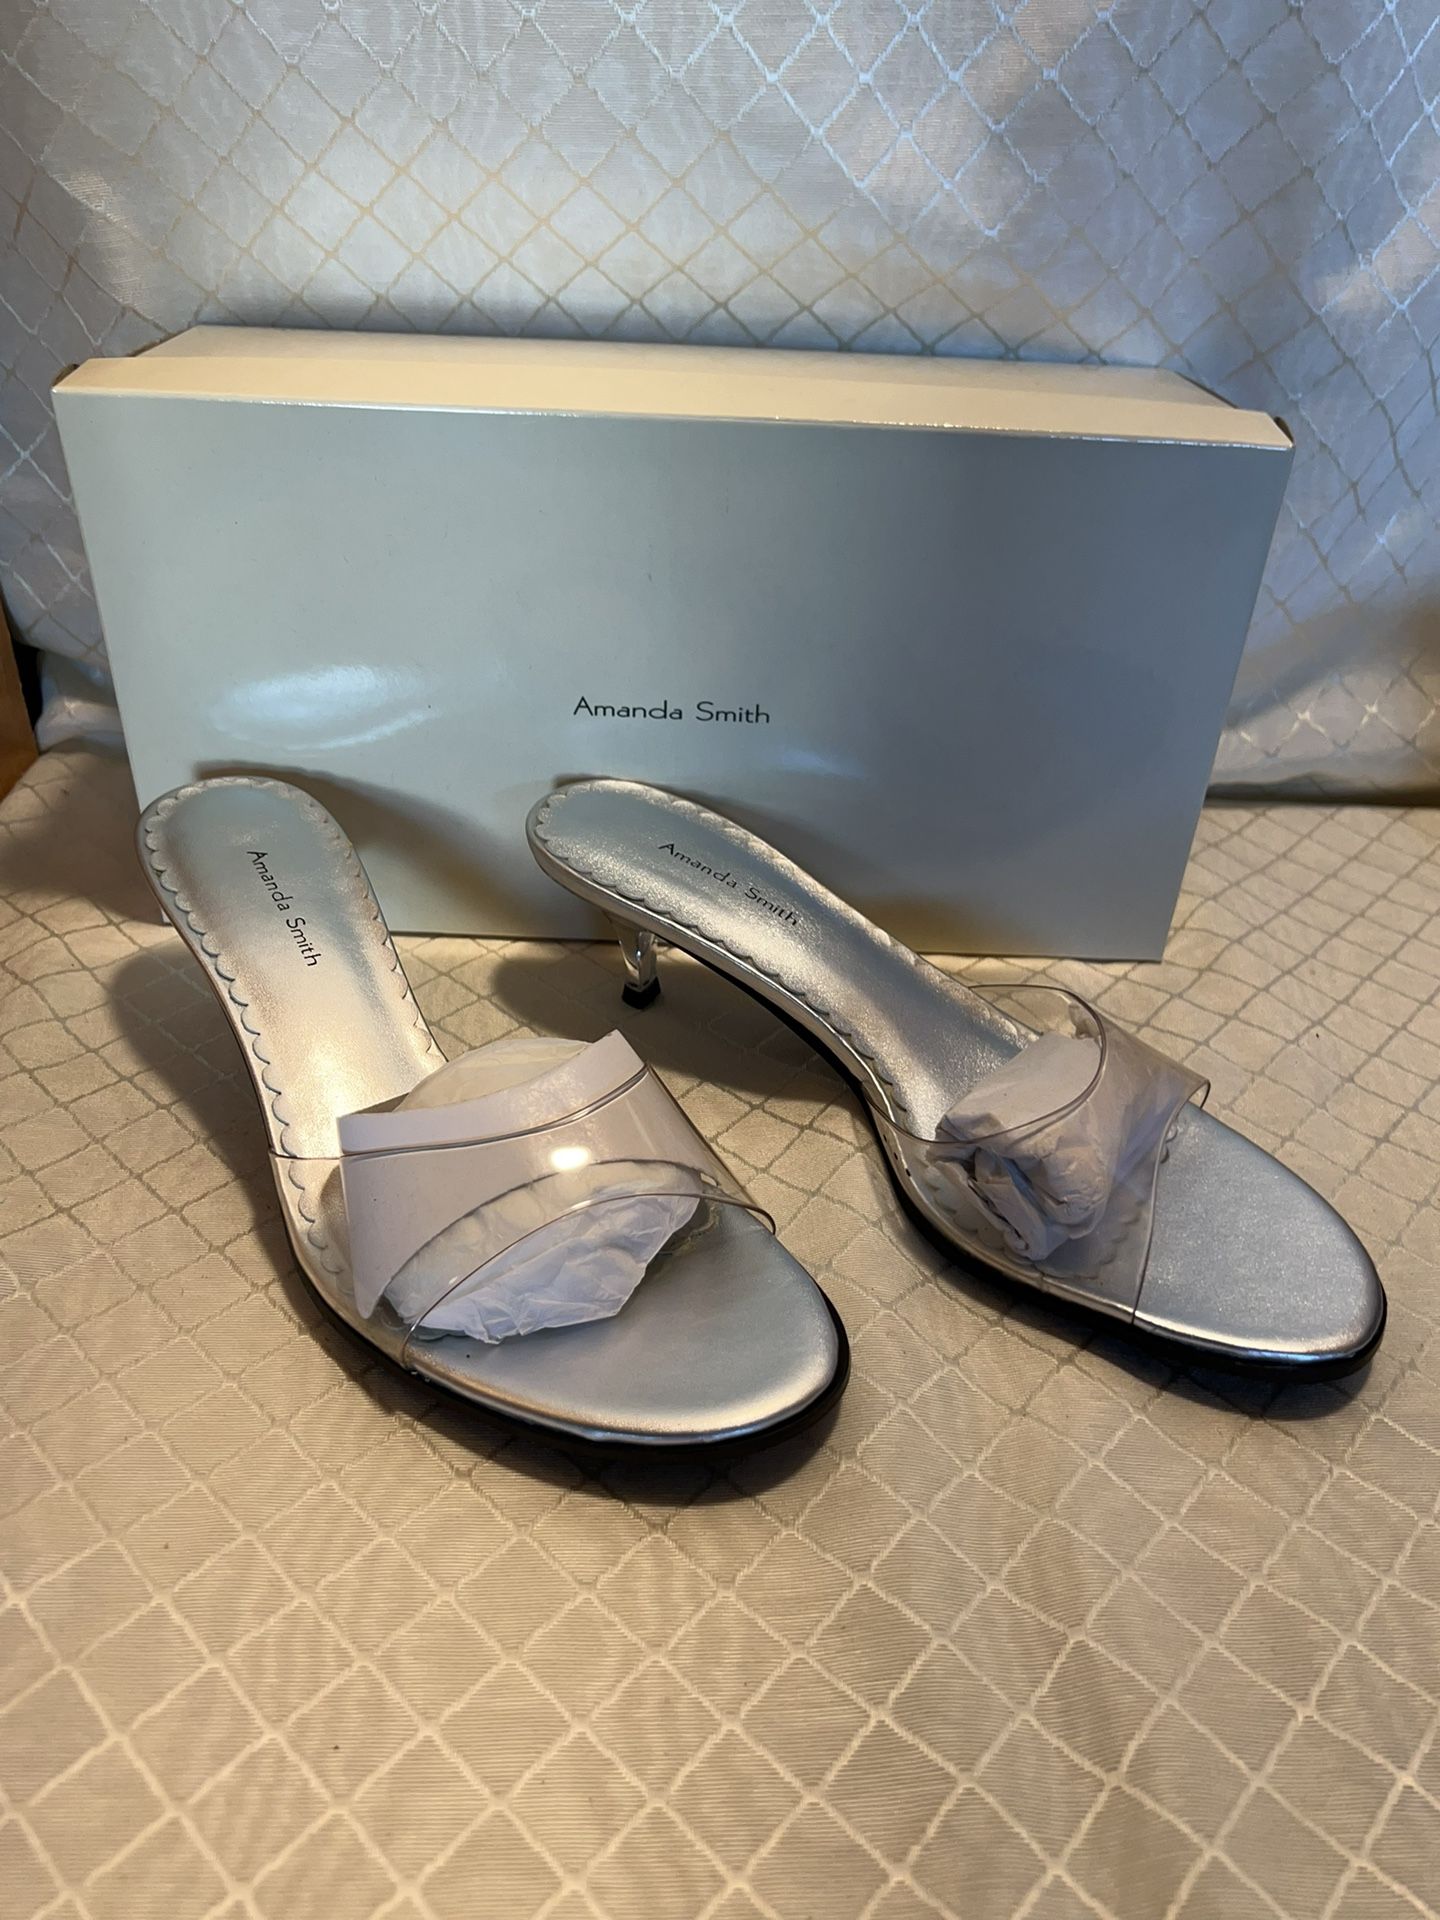 Amanda Smith Shoes Slip On Pump  Silver & Clear Size 7.5 Women's